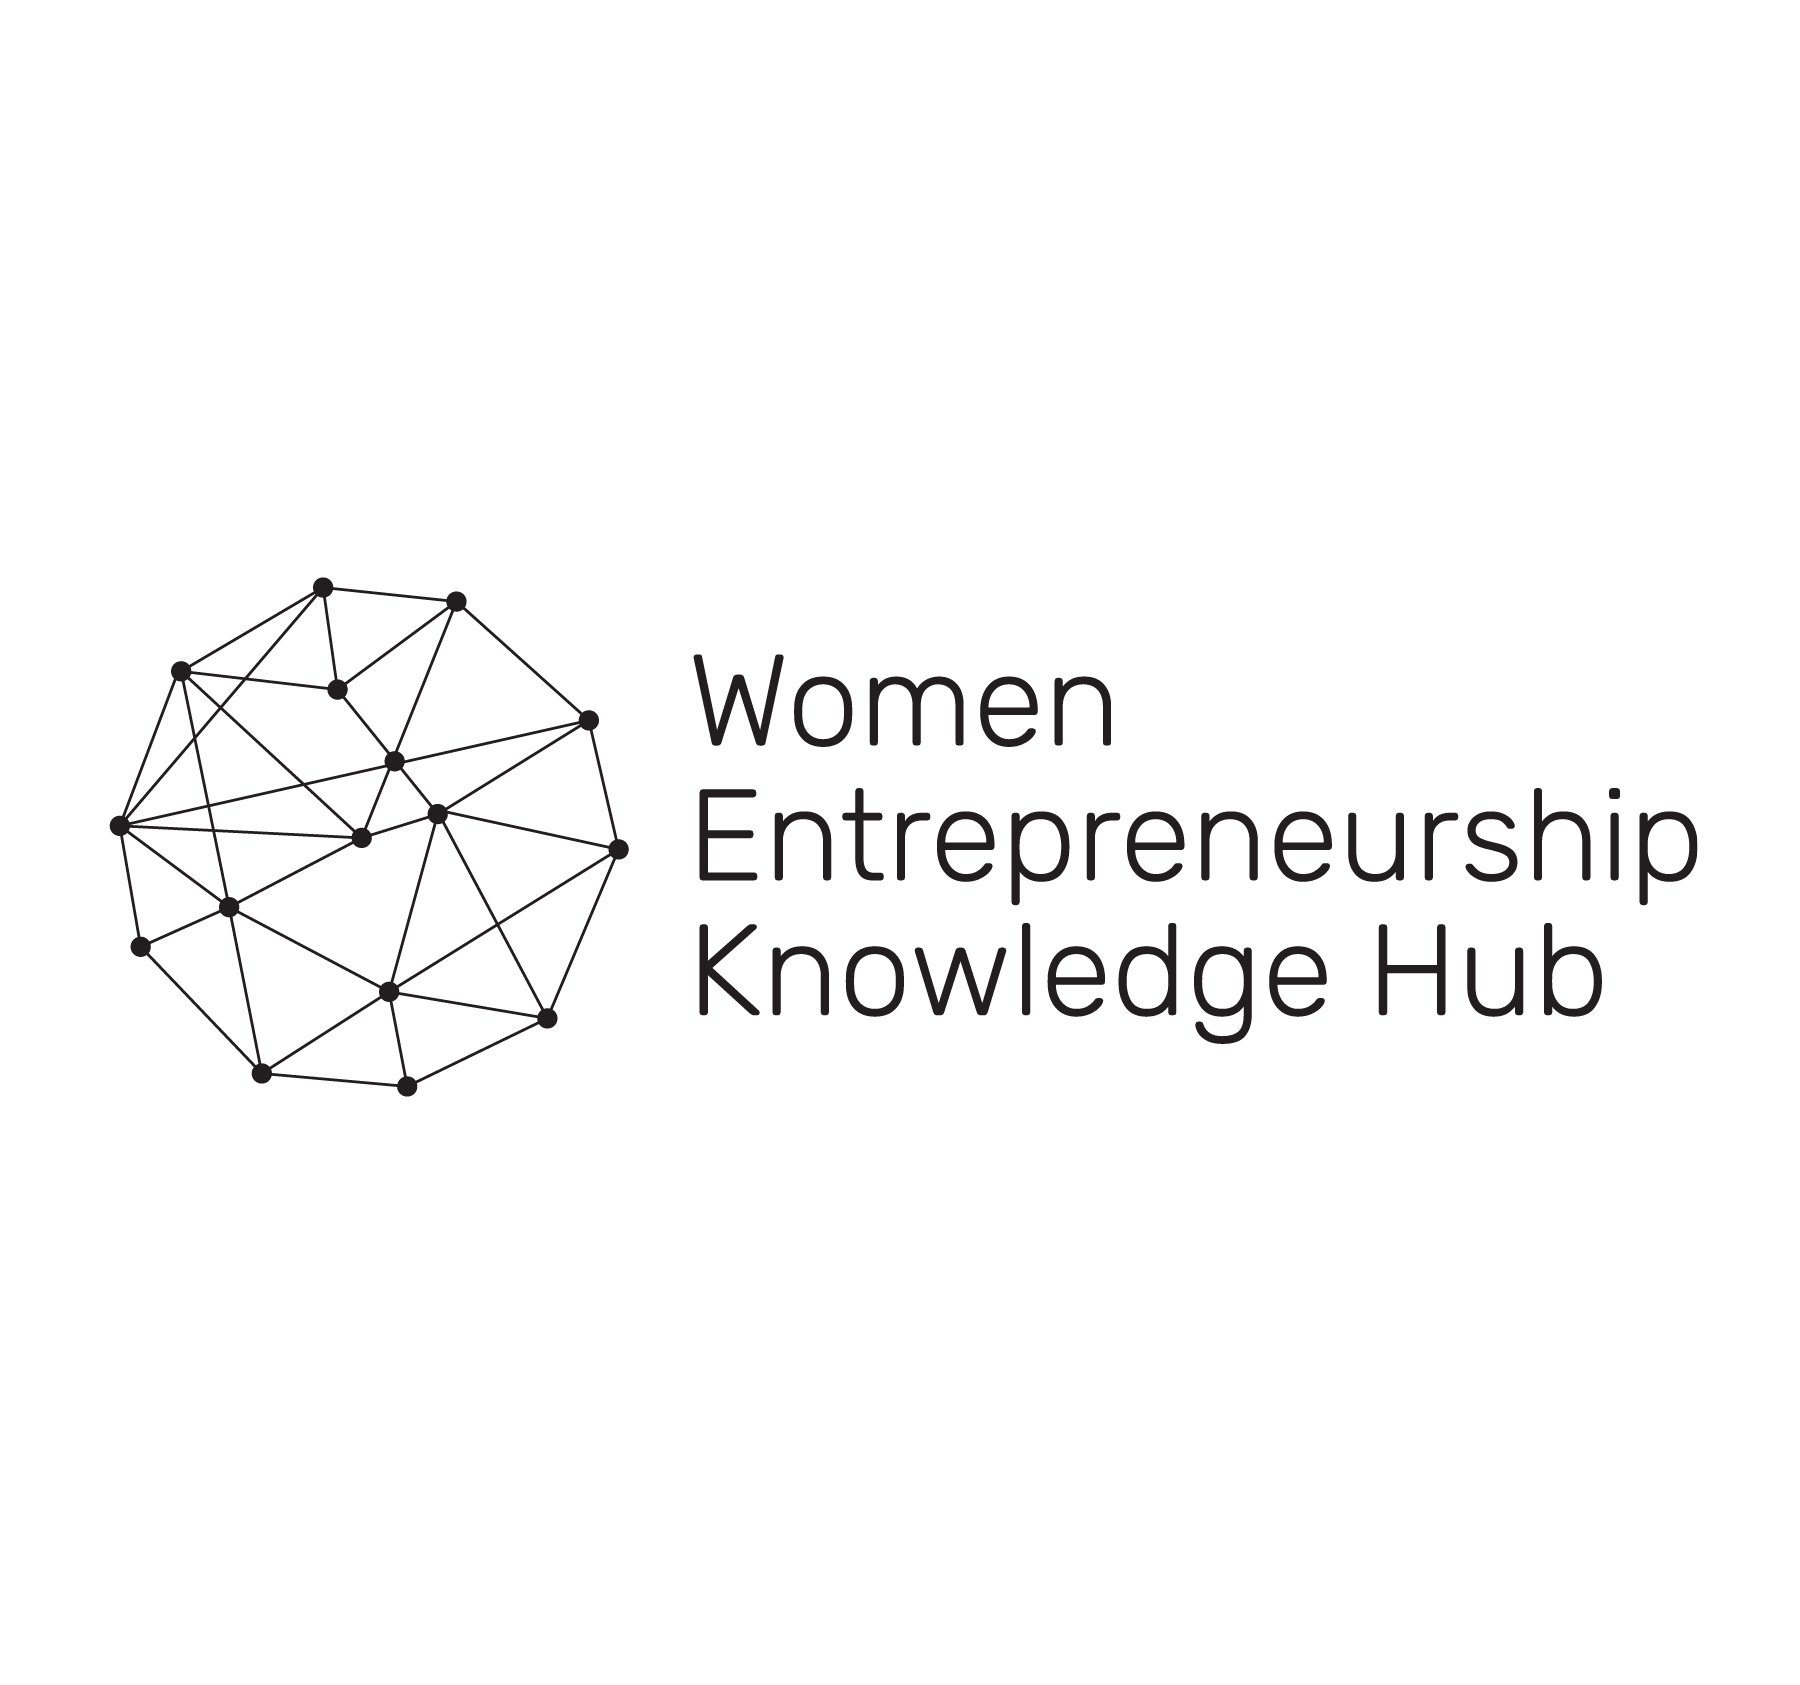 Women Entrepreneurship Knowledge Hub connects Women Entrepreneurs with info and support